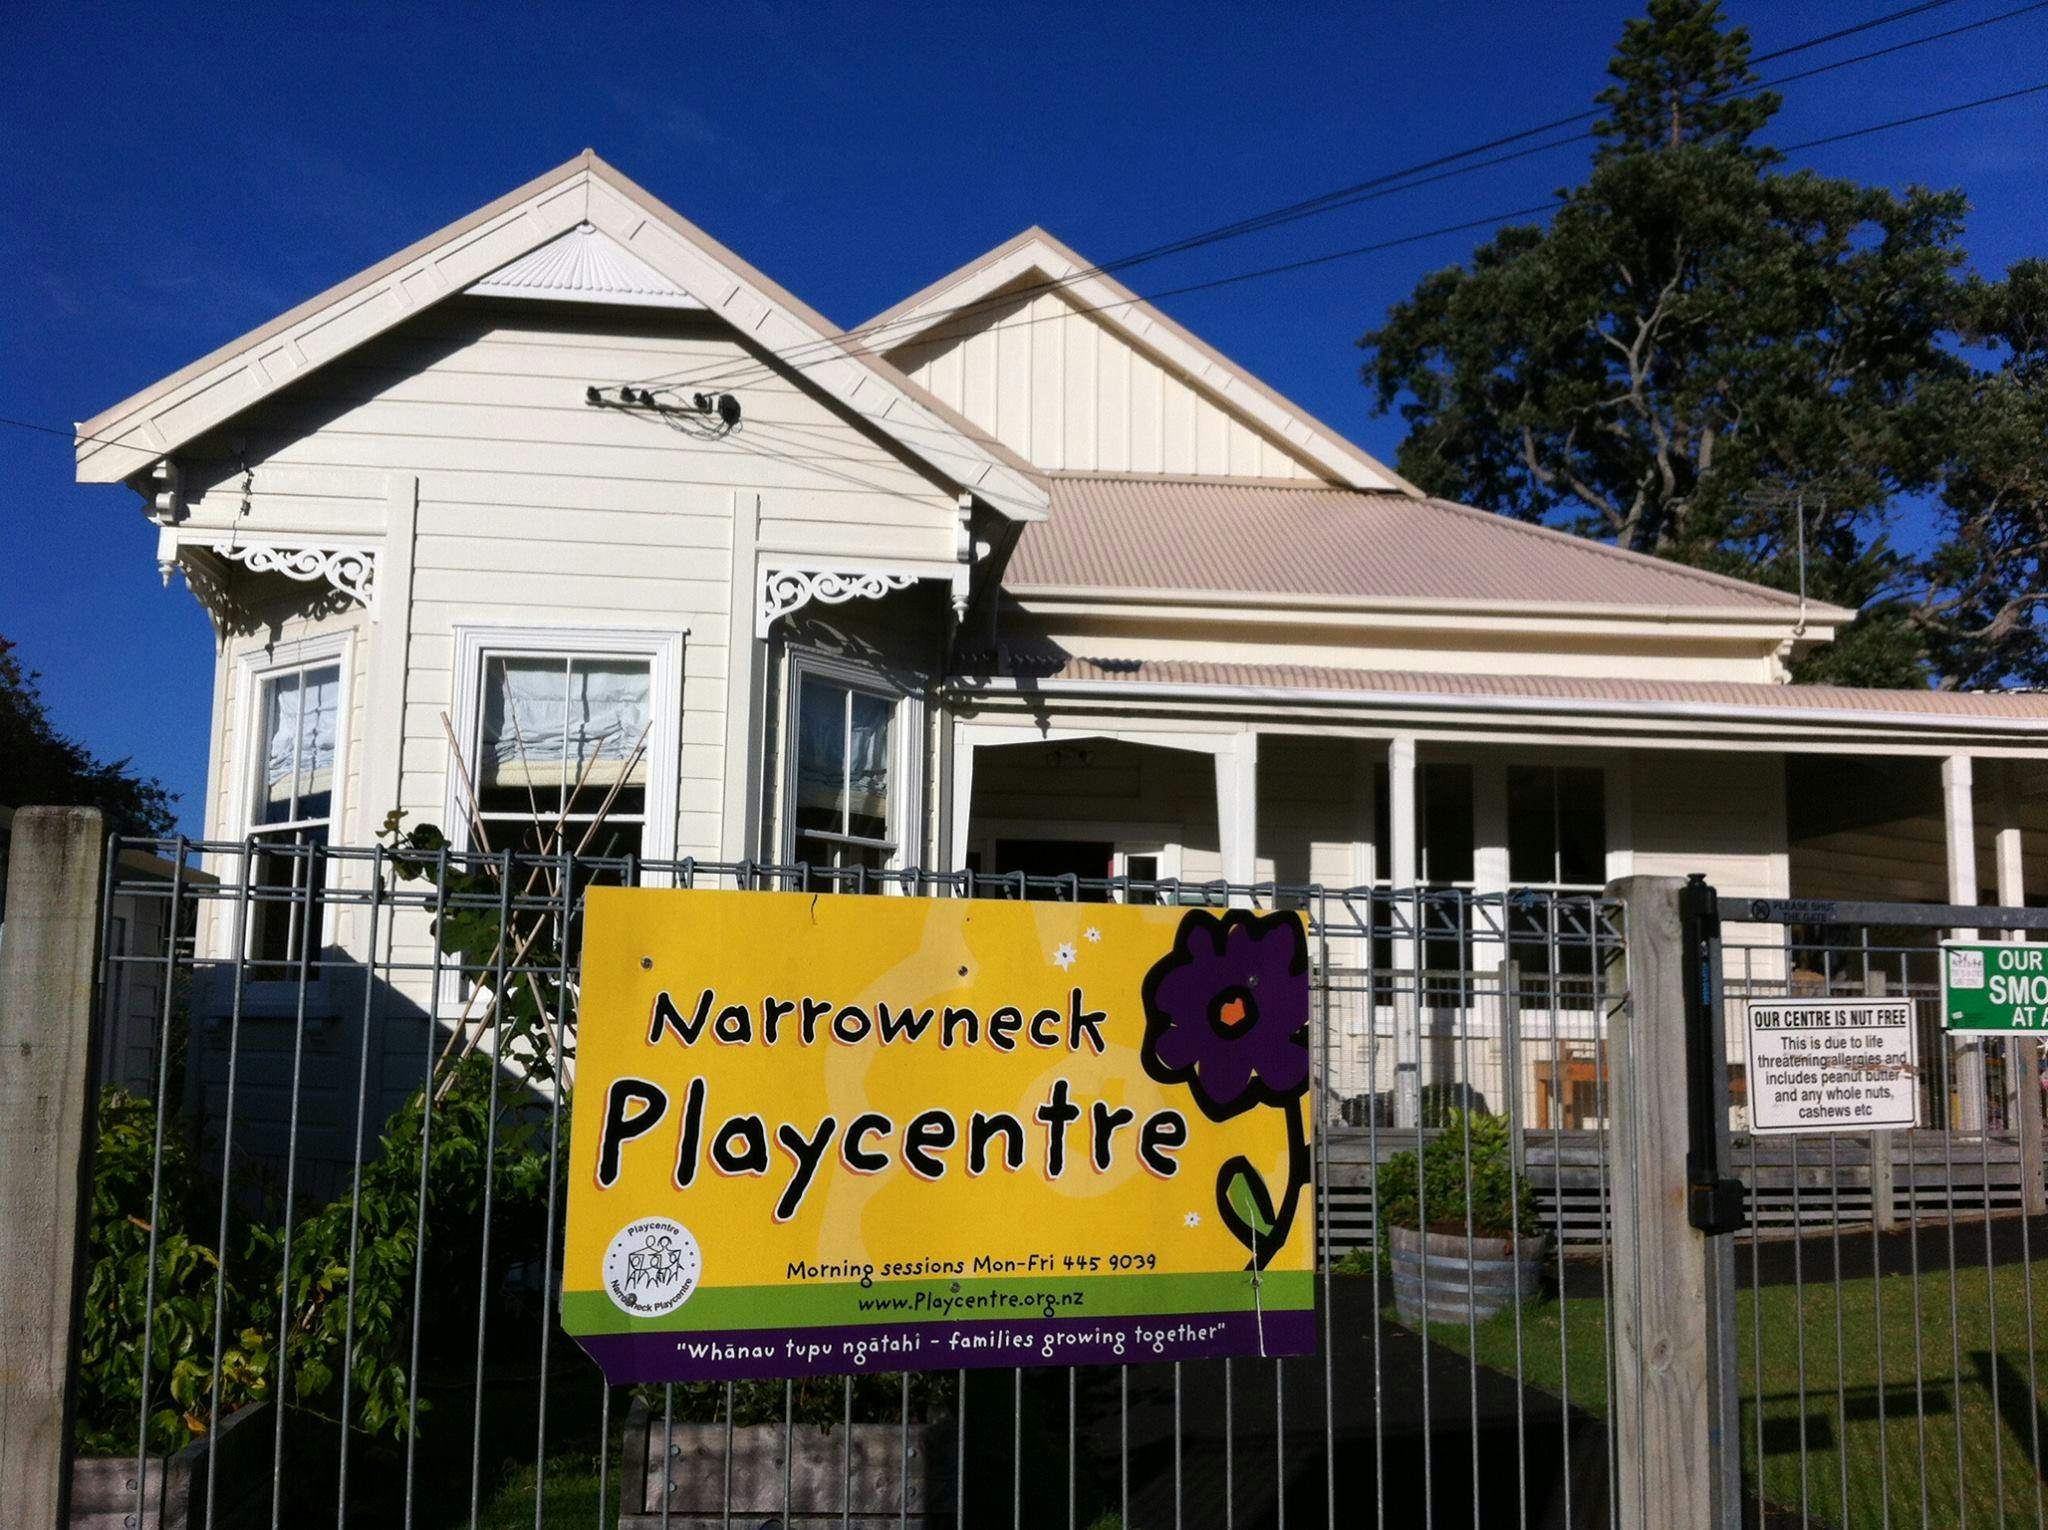 A picture of Narrowneck Playcentre